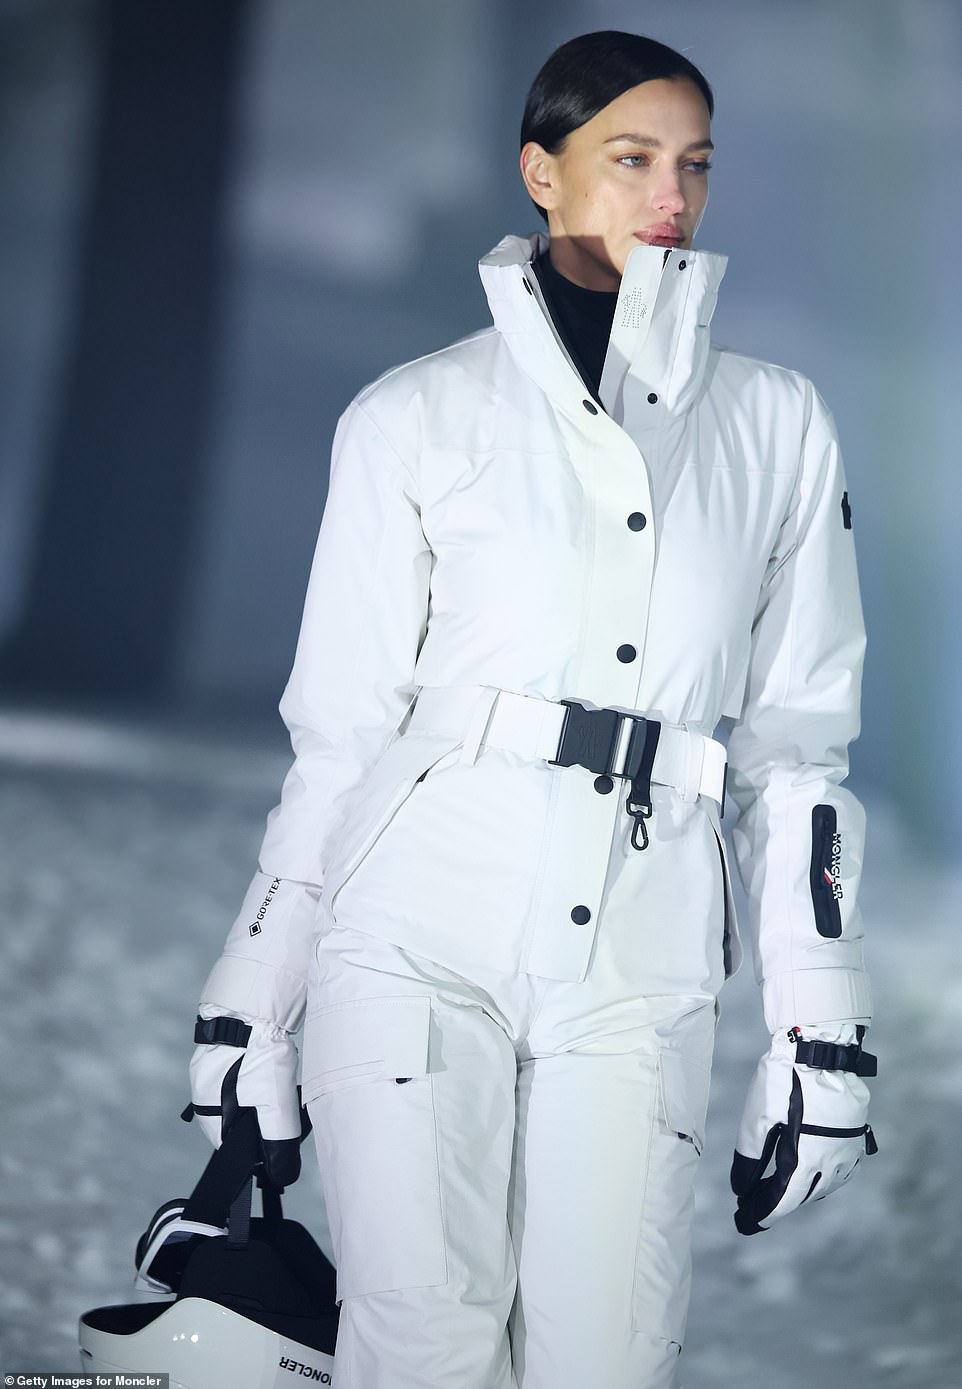 Irina - whose romance with Tom Brady continues to grow - looked ready for a slalom descent in her chic all-white ski suit